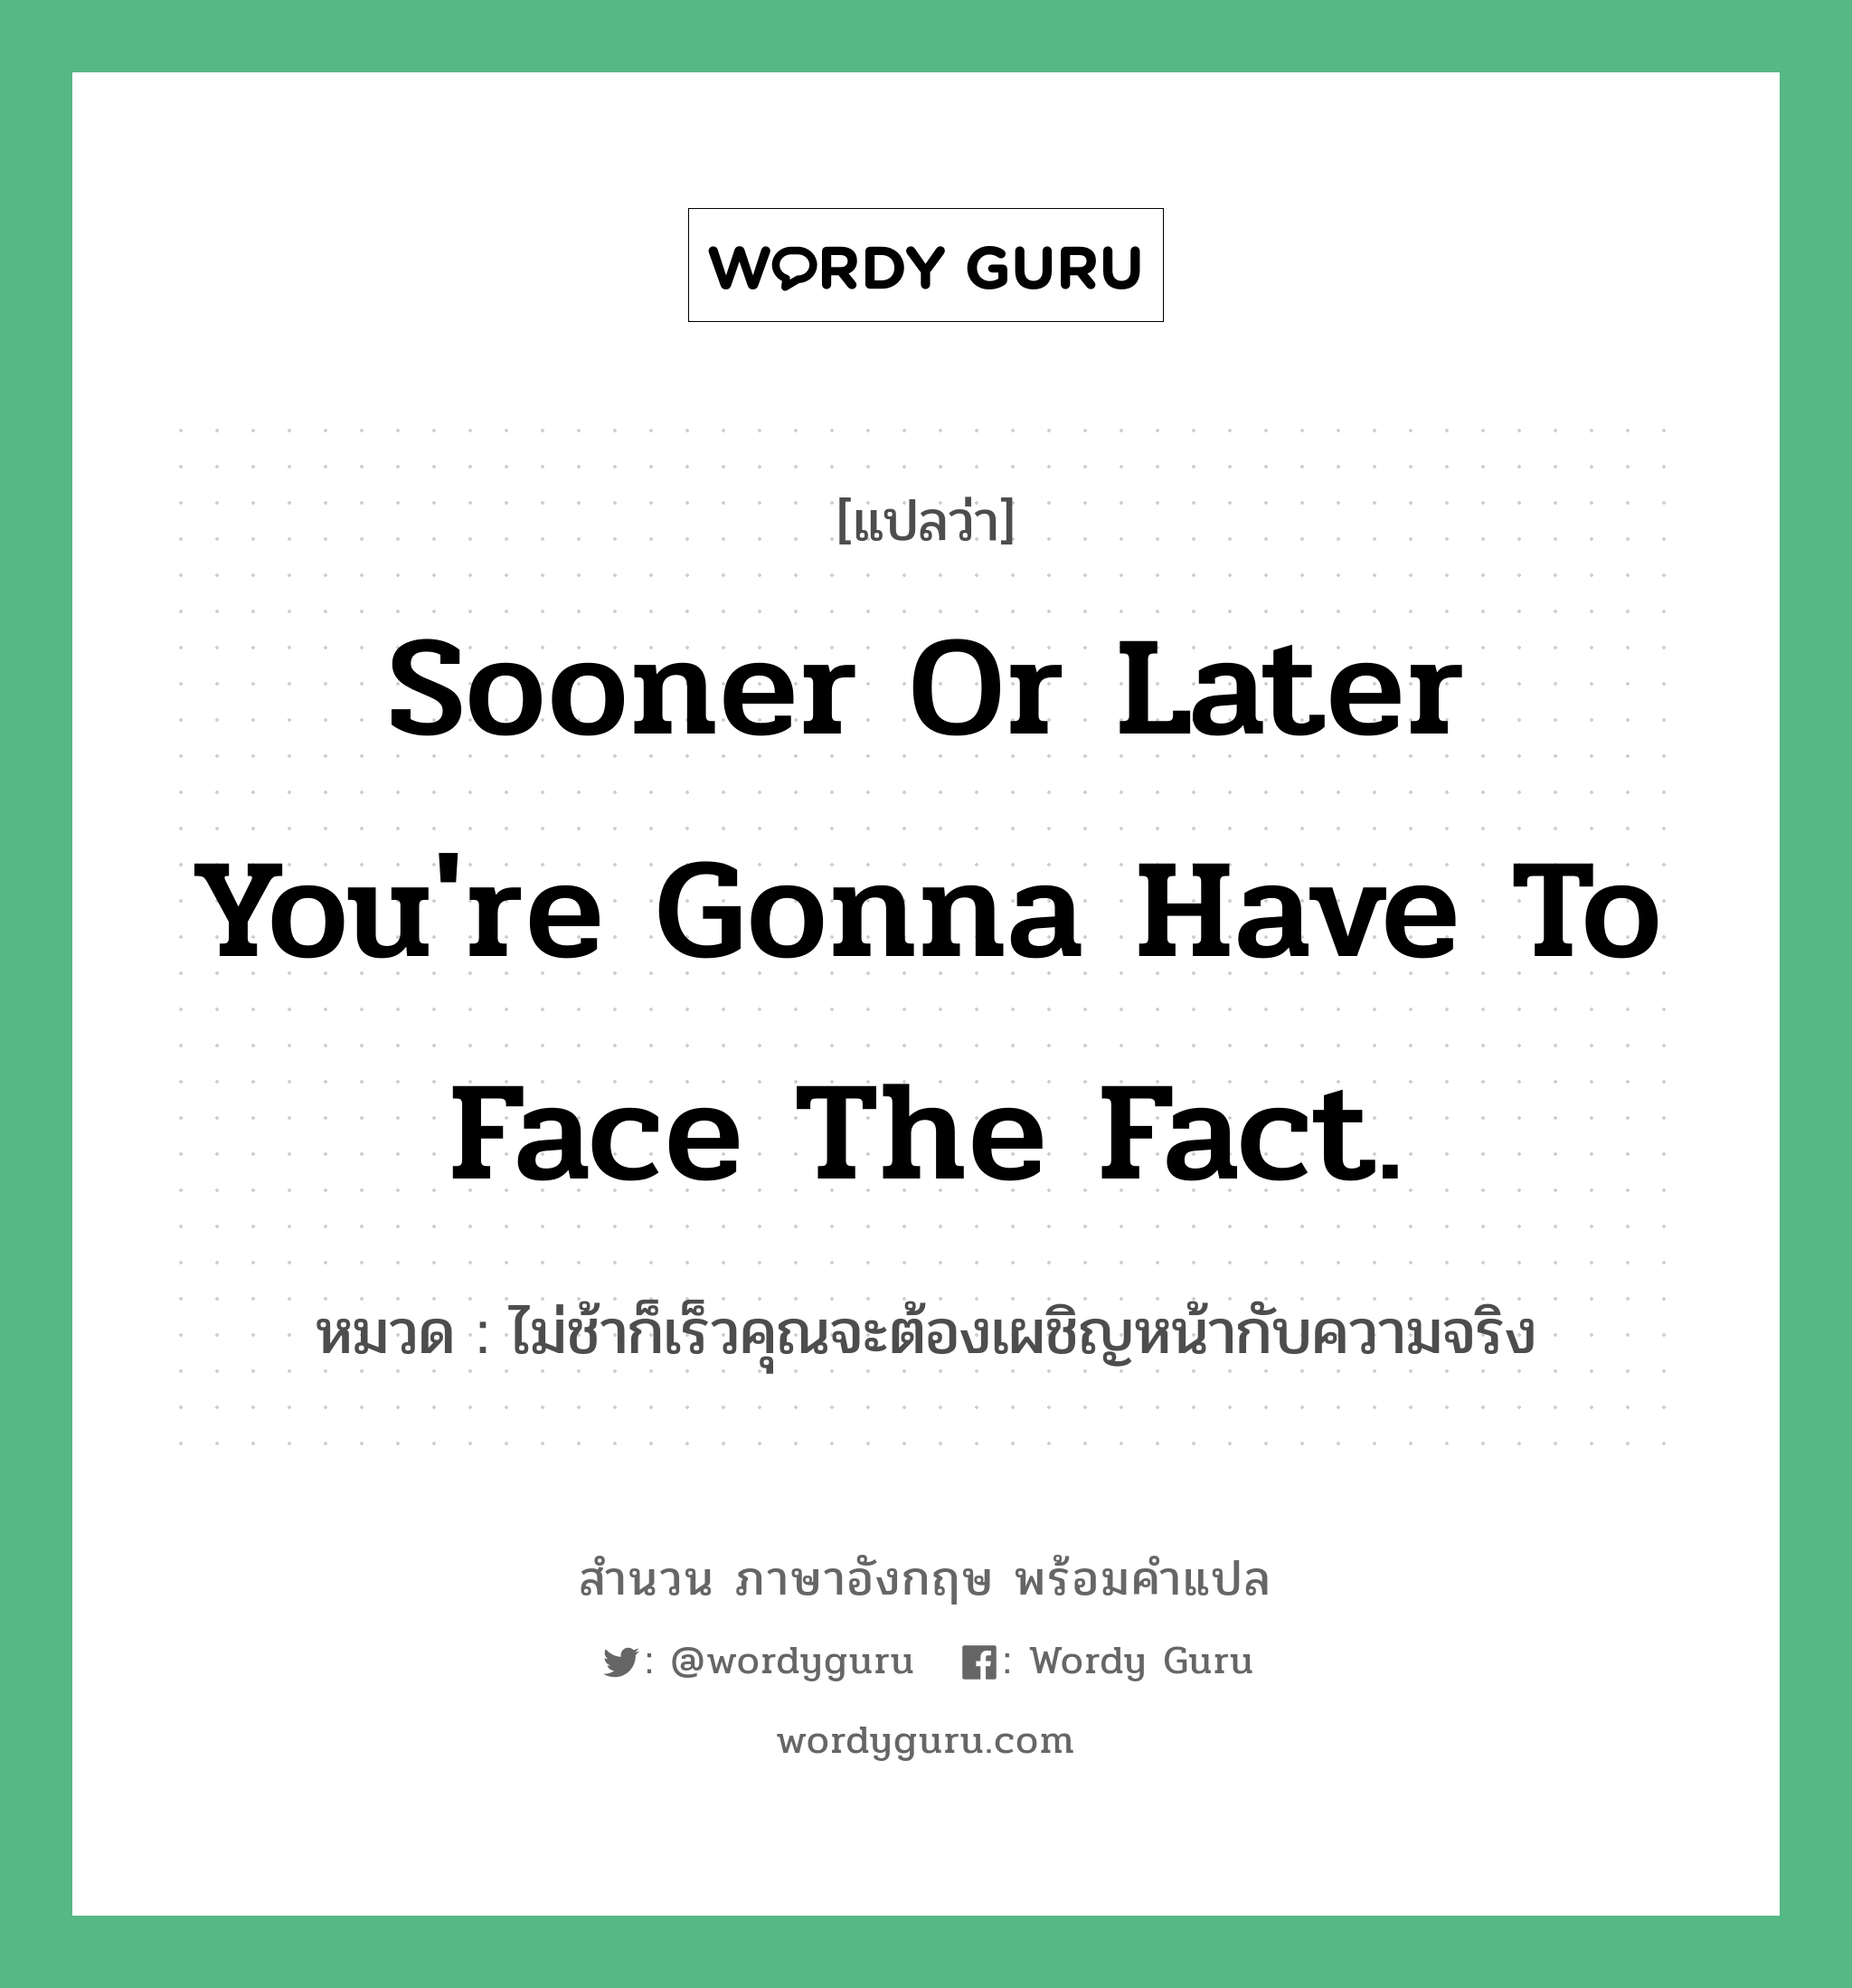 Sooner or later you're gonna have to face the fact. แปลว่า?, สำนวนภาษาอังกฤษ Sooner or later you're gonna have to face the fact. หมวด ไม่ช้าก็เร็วคุณจะต้องเผชิญหน้ากับความจริง